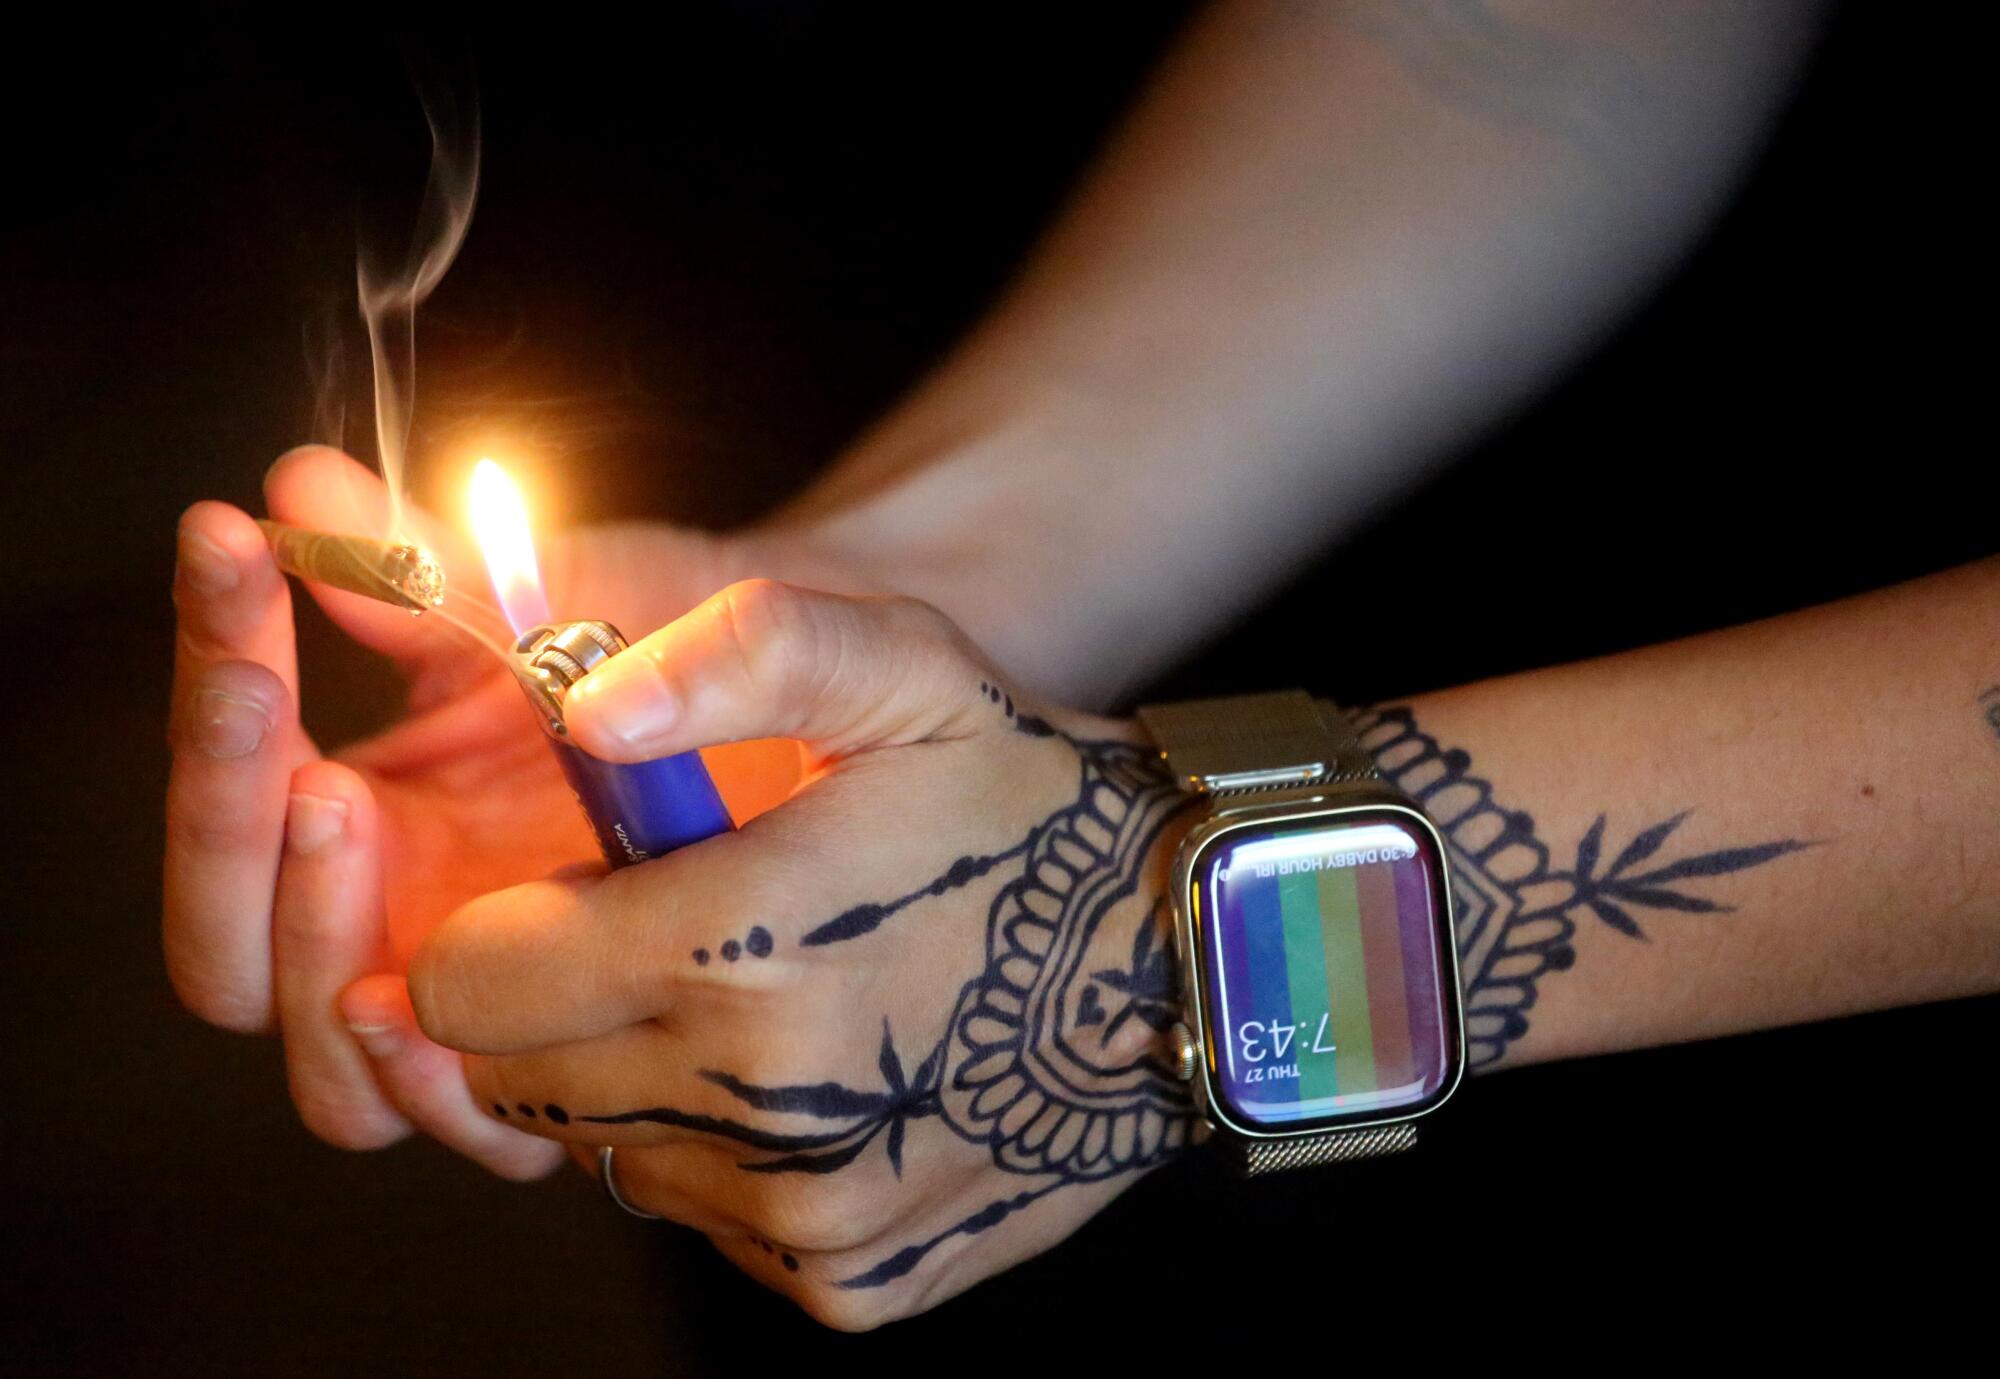 A closeup of two hands, one with henna tattoos and a large watch, lighting a joint with a plastic lighter